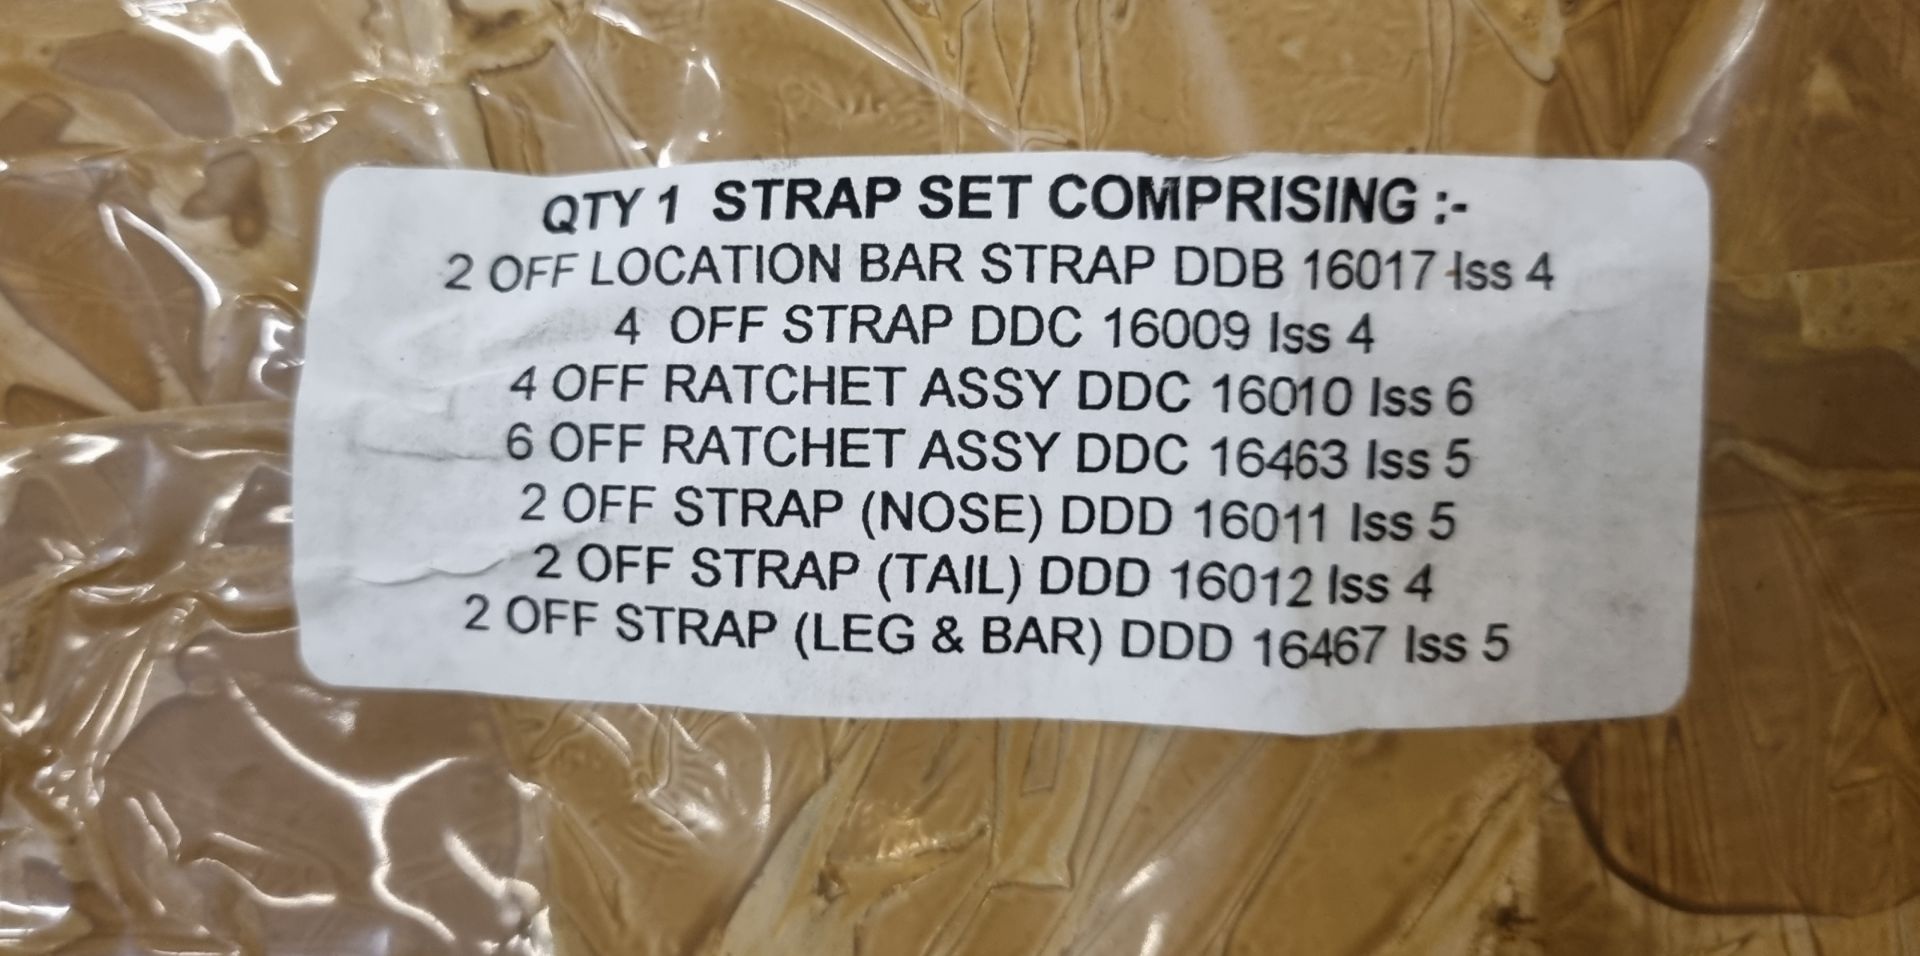 4x 22 piece ratchet and strap sets - Image 10 of 10